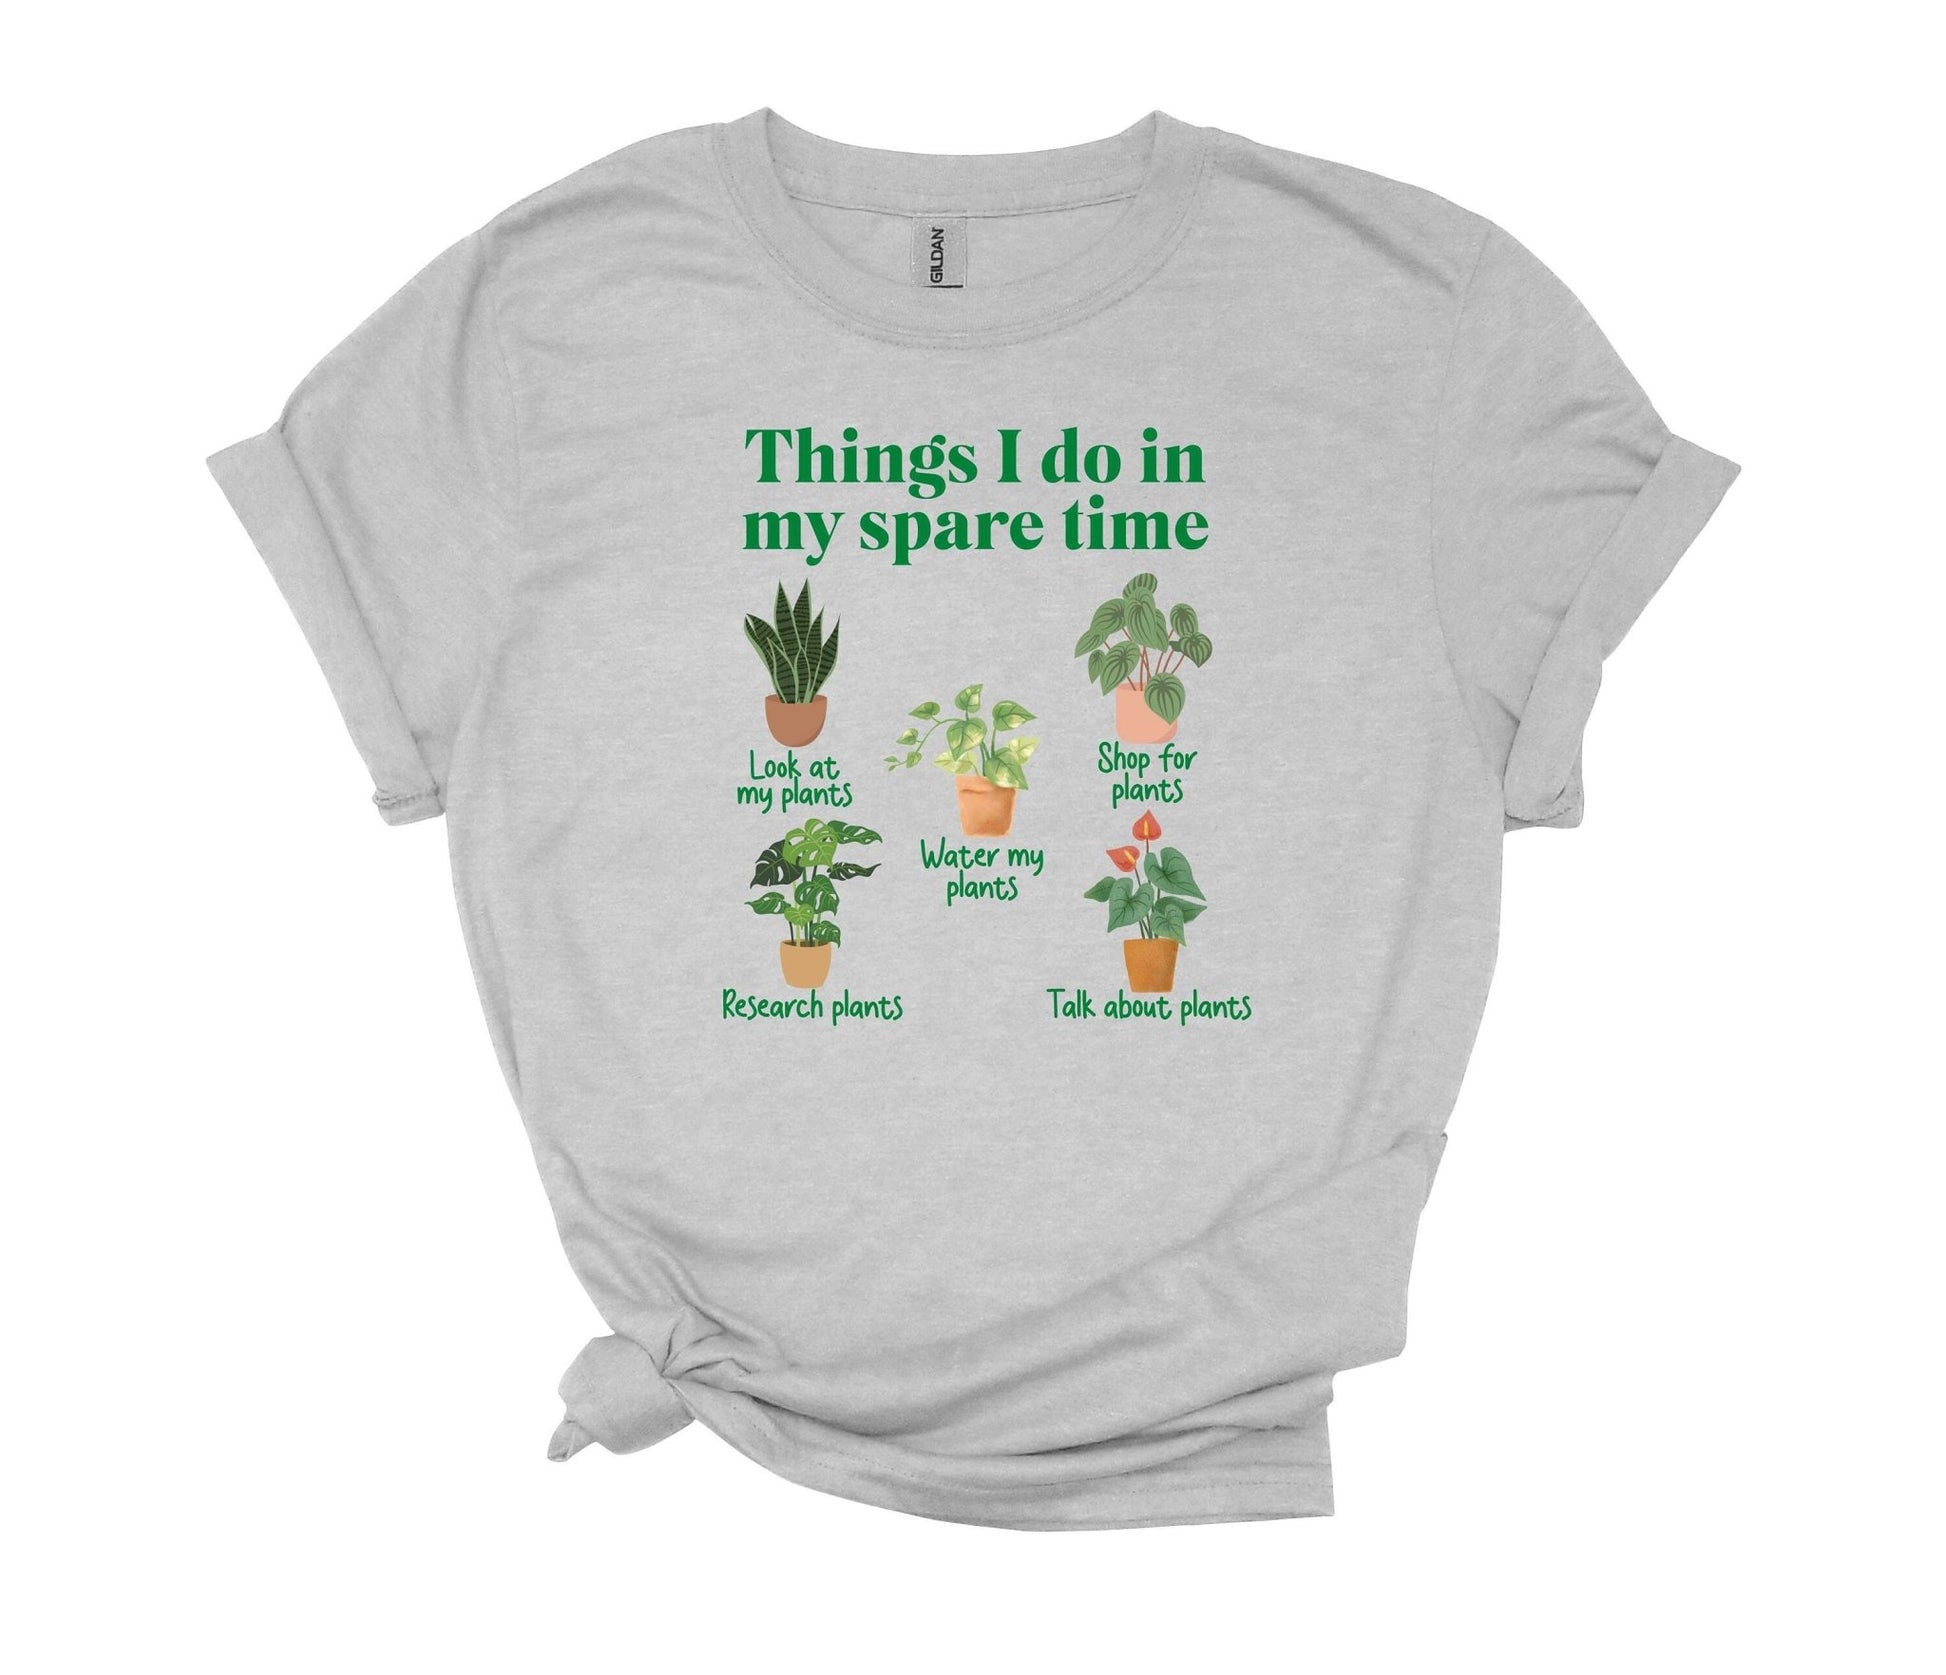 Funny Plant Lover Shirt, Things I do in my spare time, Gardening, plant mom dad, farm shirt, houseplant addict, botanical - SBS T Shop